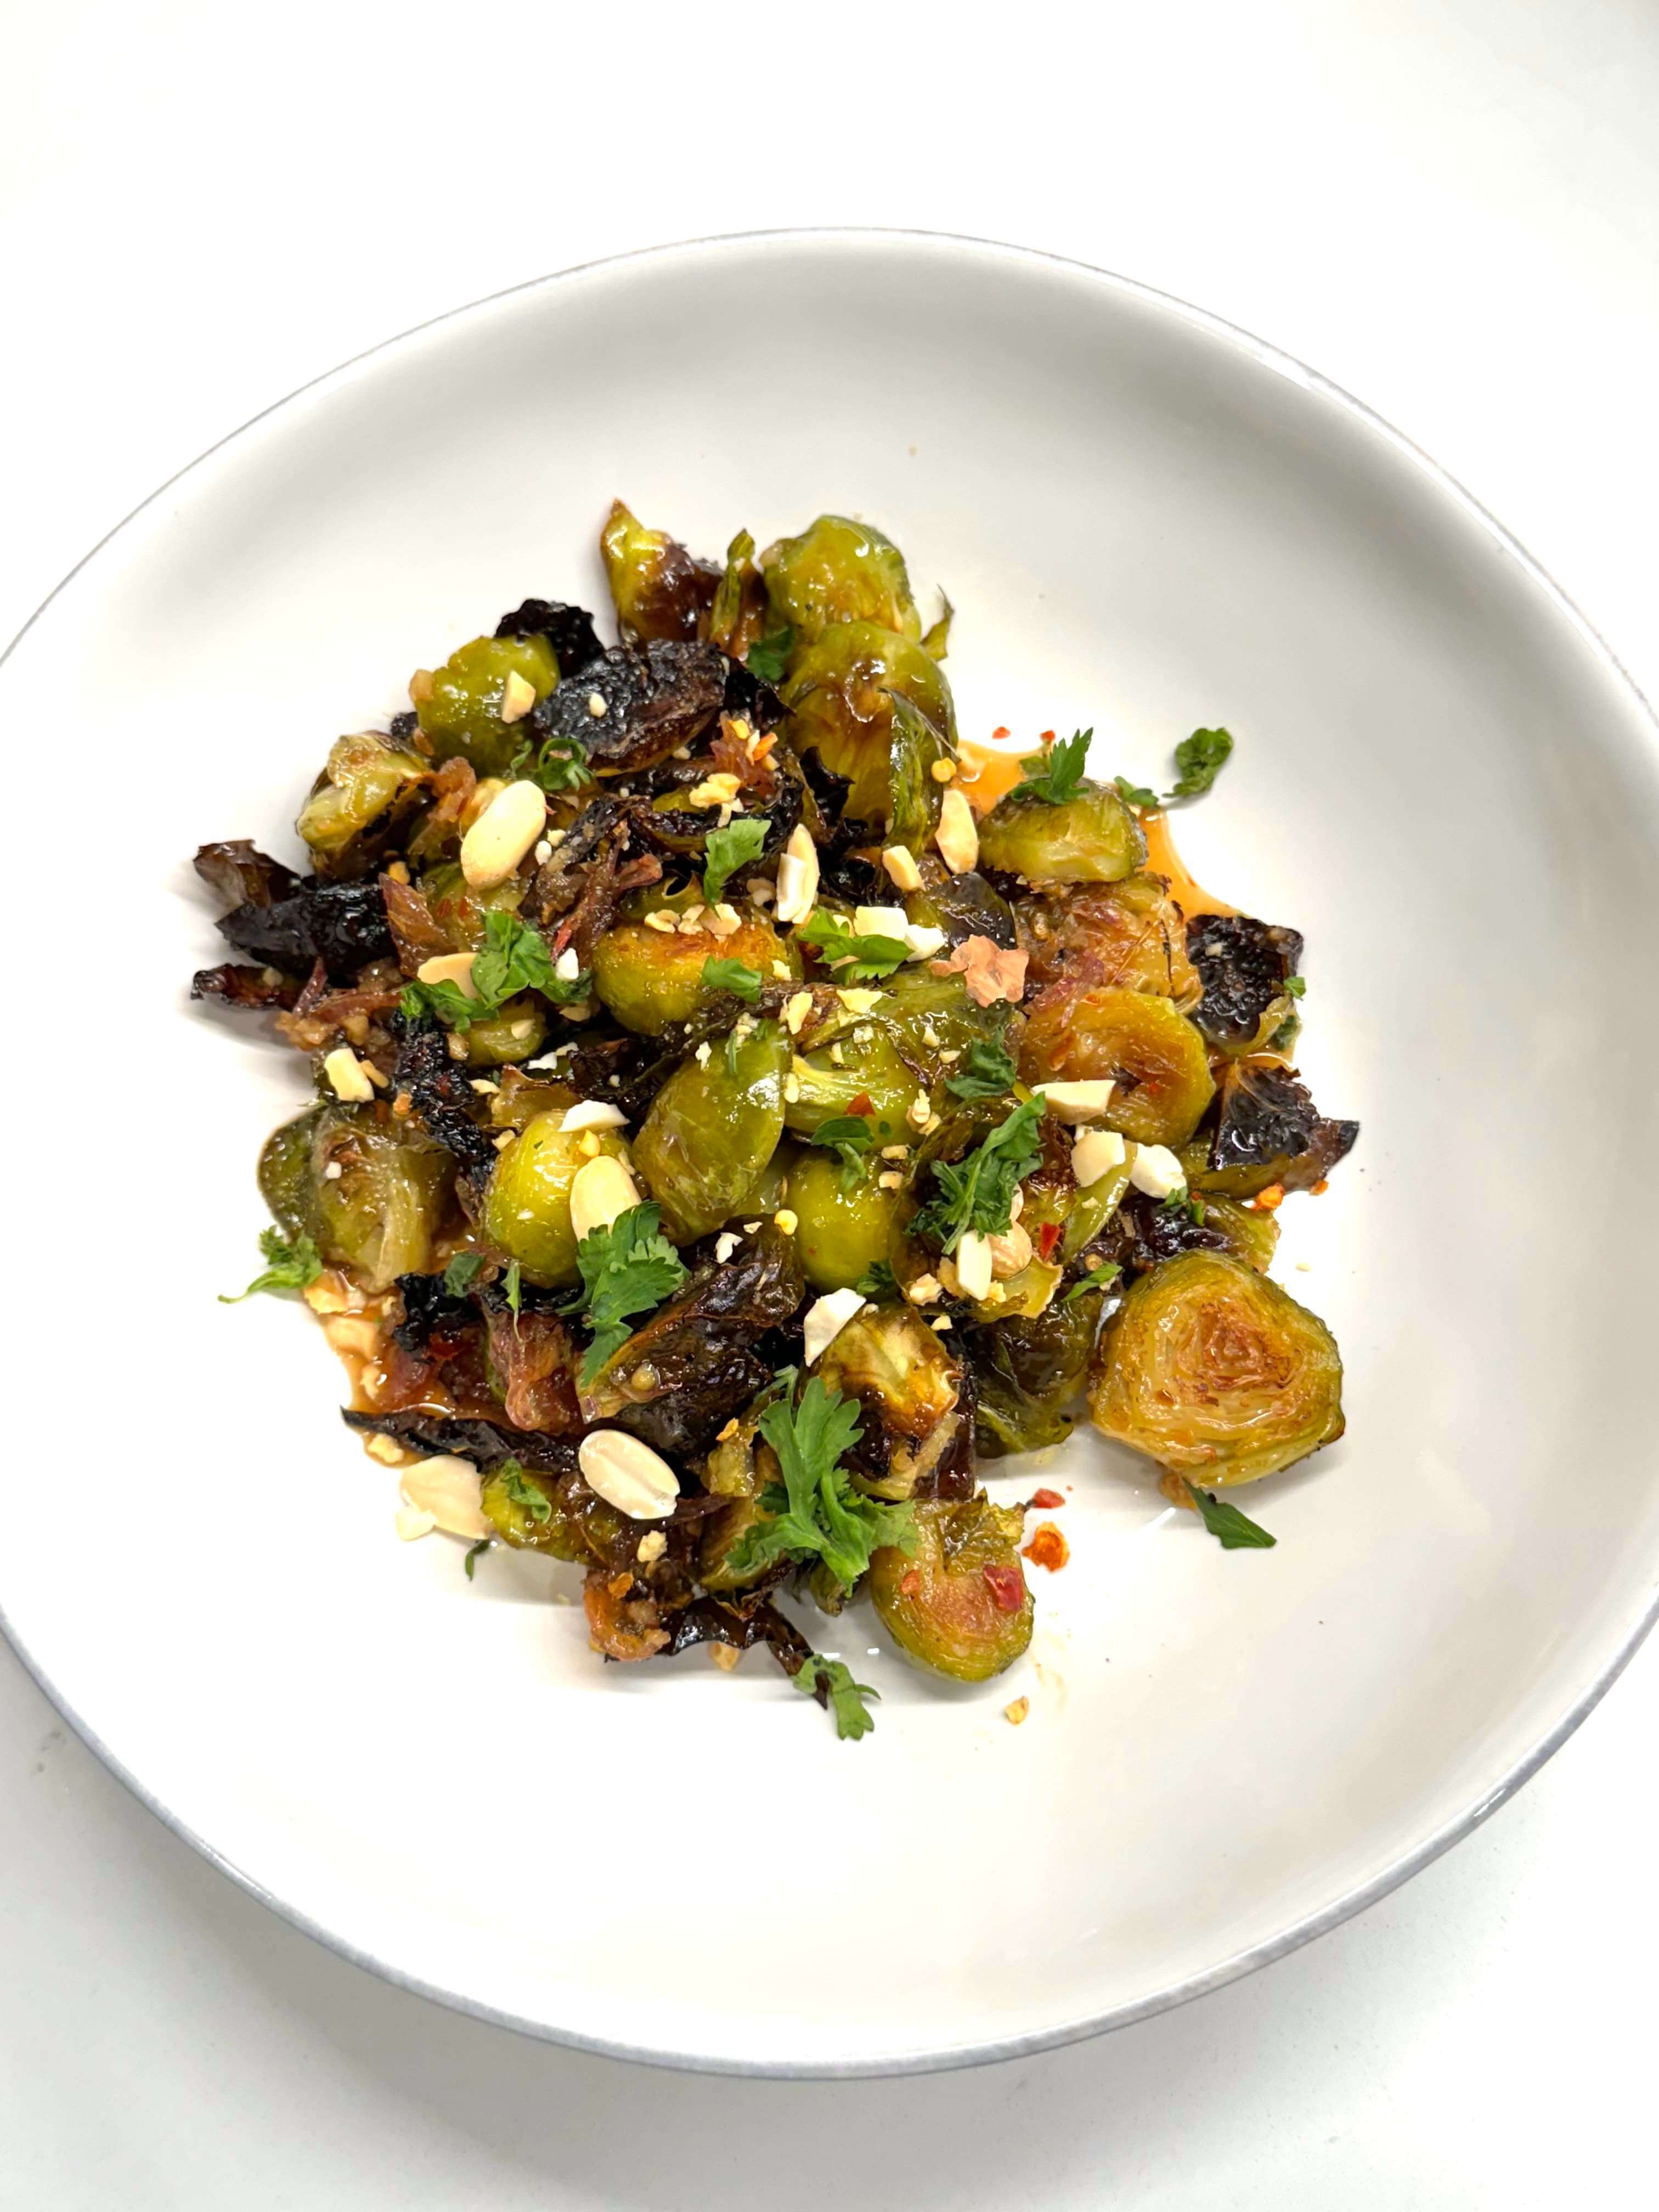 Fish Sauce Brussels Sprouts.jpg__PID:b6f03884-2414-474e-b8e8-05a0c0fd9d45